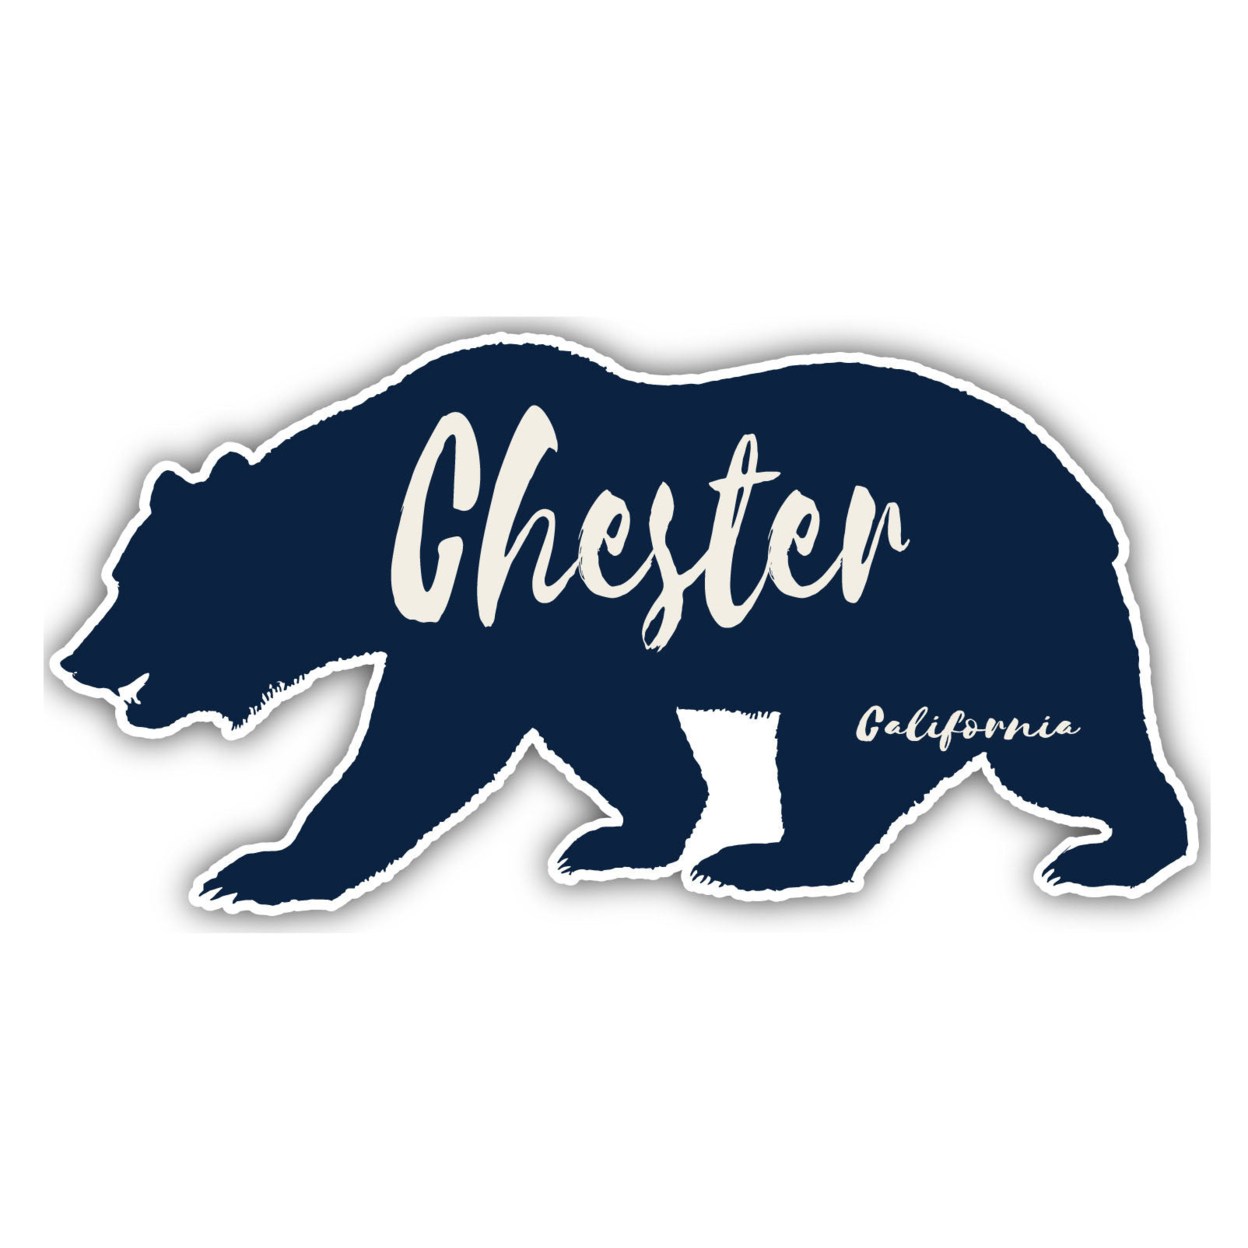 Chester California Souvenir Decorative Stickers (Choose Theme And Size) - Single Unit, 2-Inch, Great Outdoors